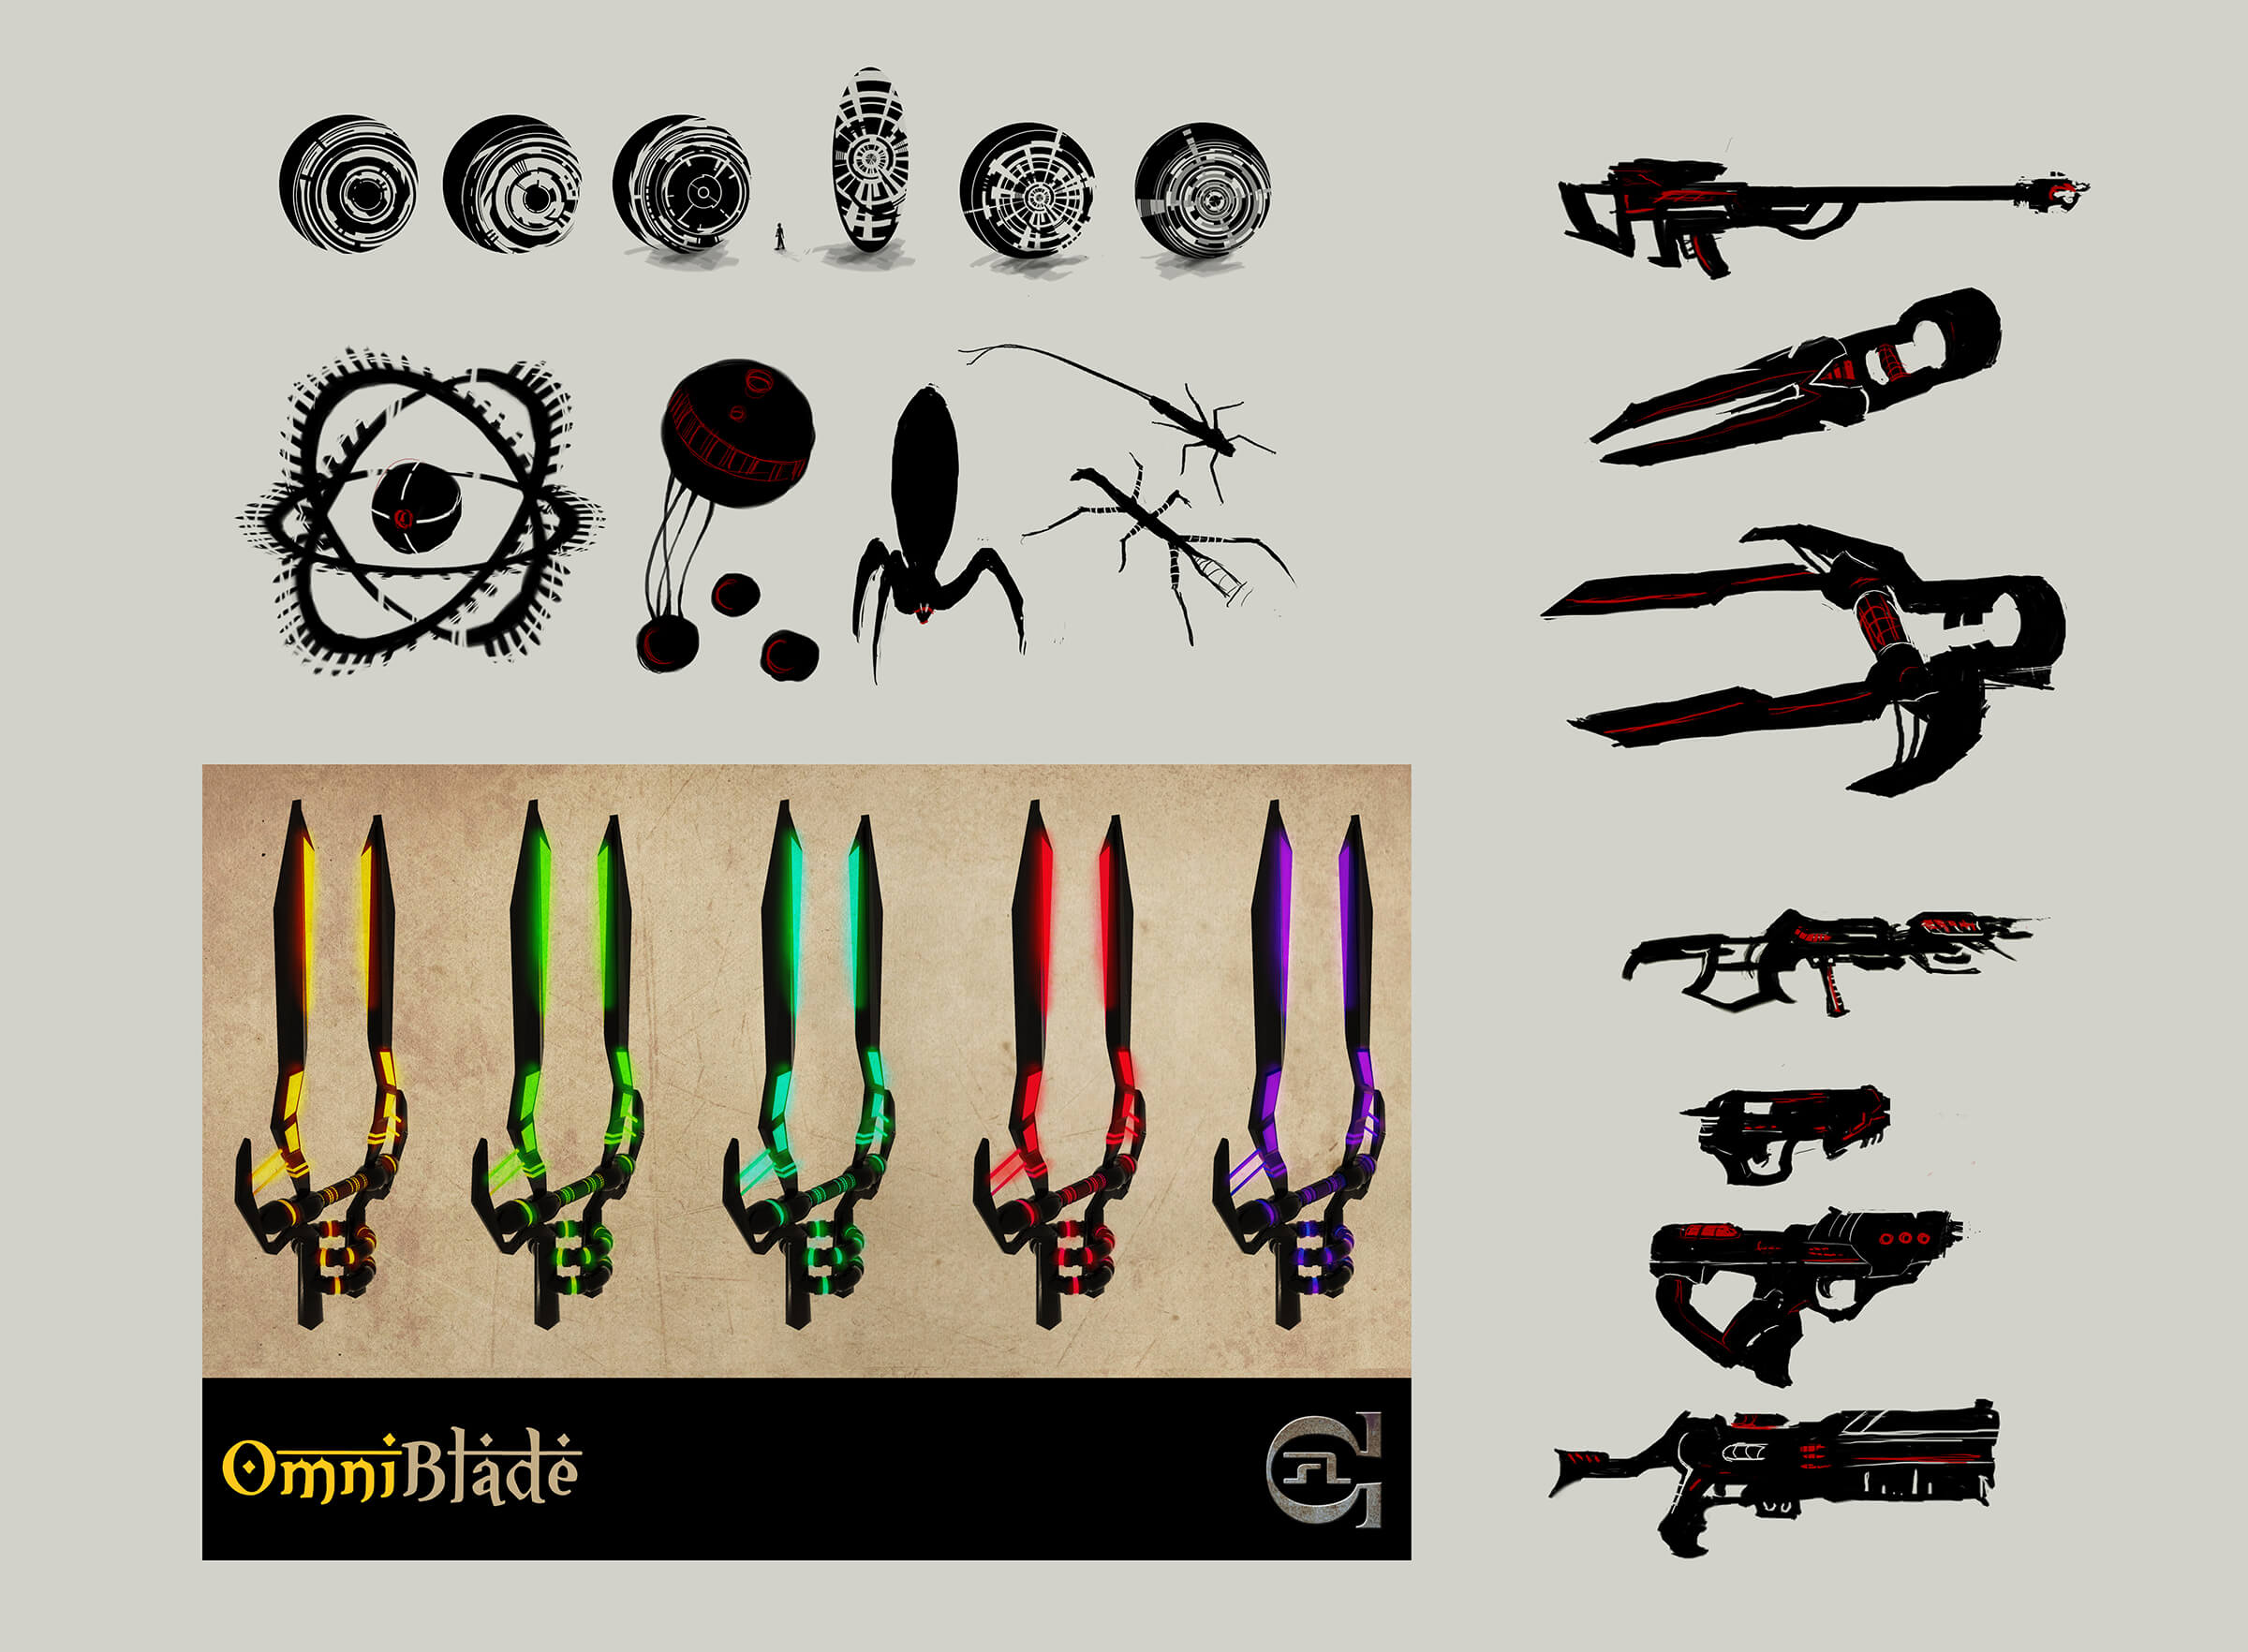 Sketches of various futuristic tools and implements including pistols, rifles, and "OmniBlades" of various colors.